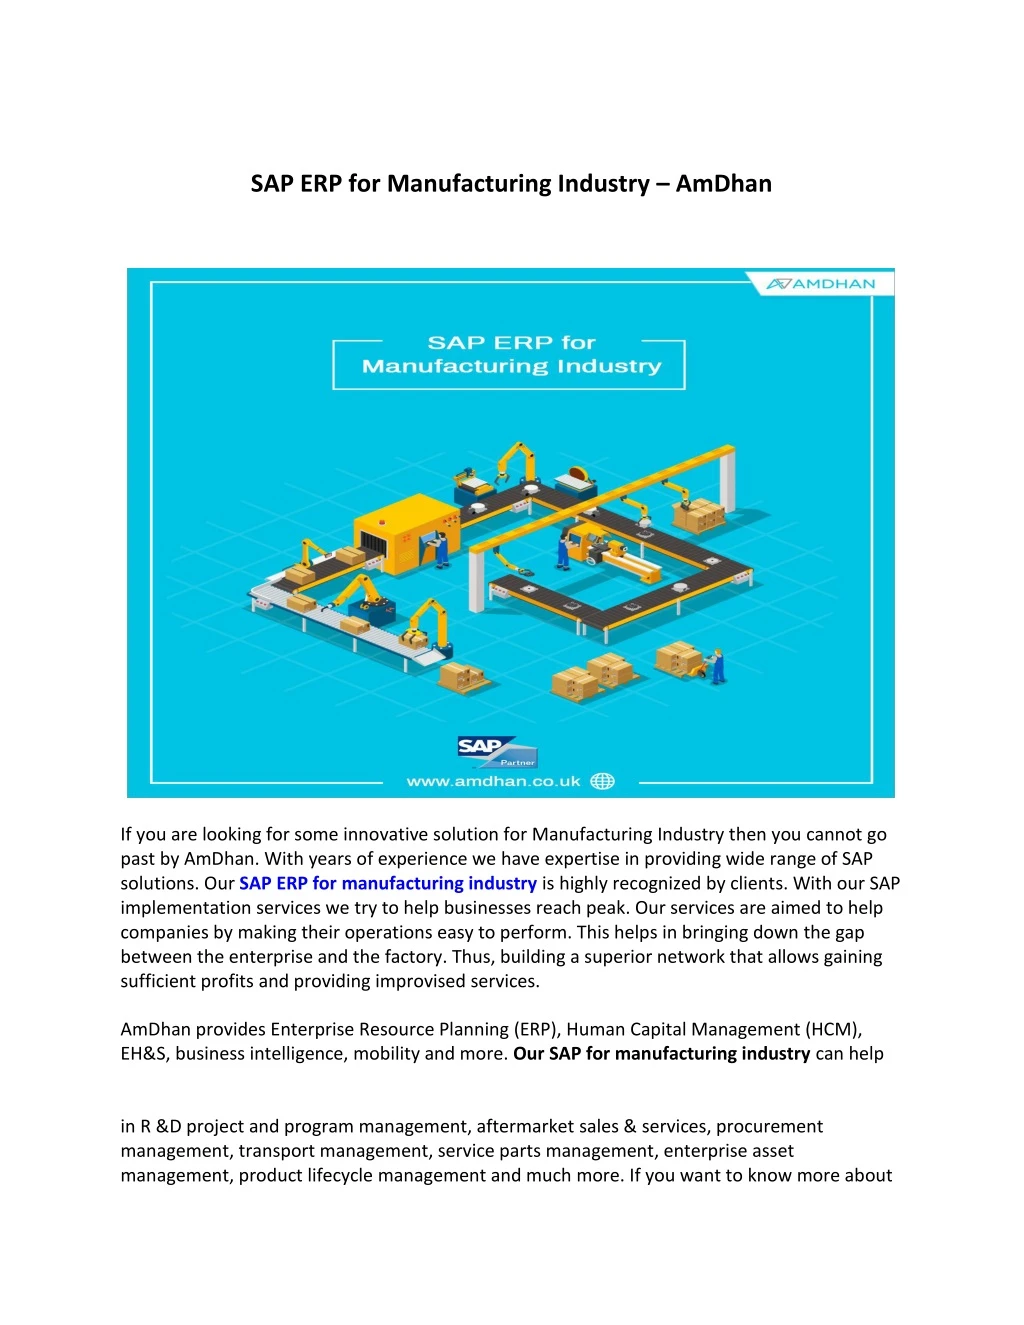 sap erp for manufacturing industry amdhan